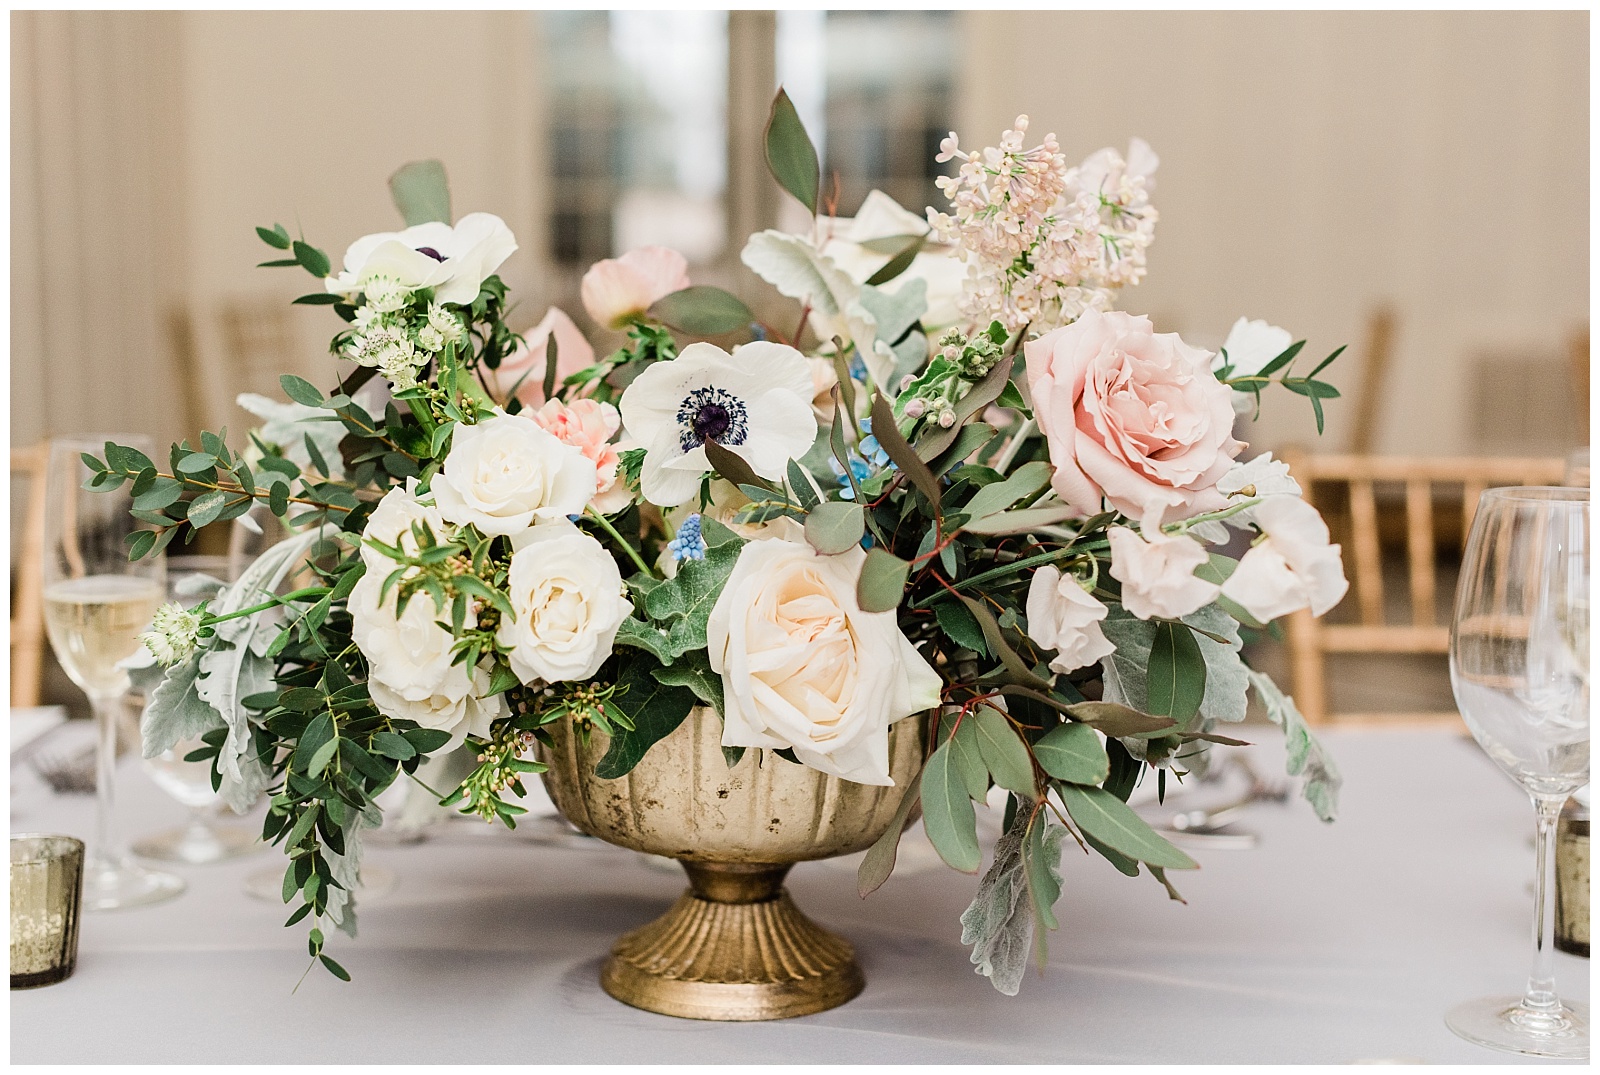 A centerpiece in a gold vase features eucalyptus, anemone flowers, and roses.